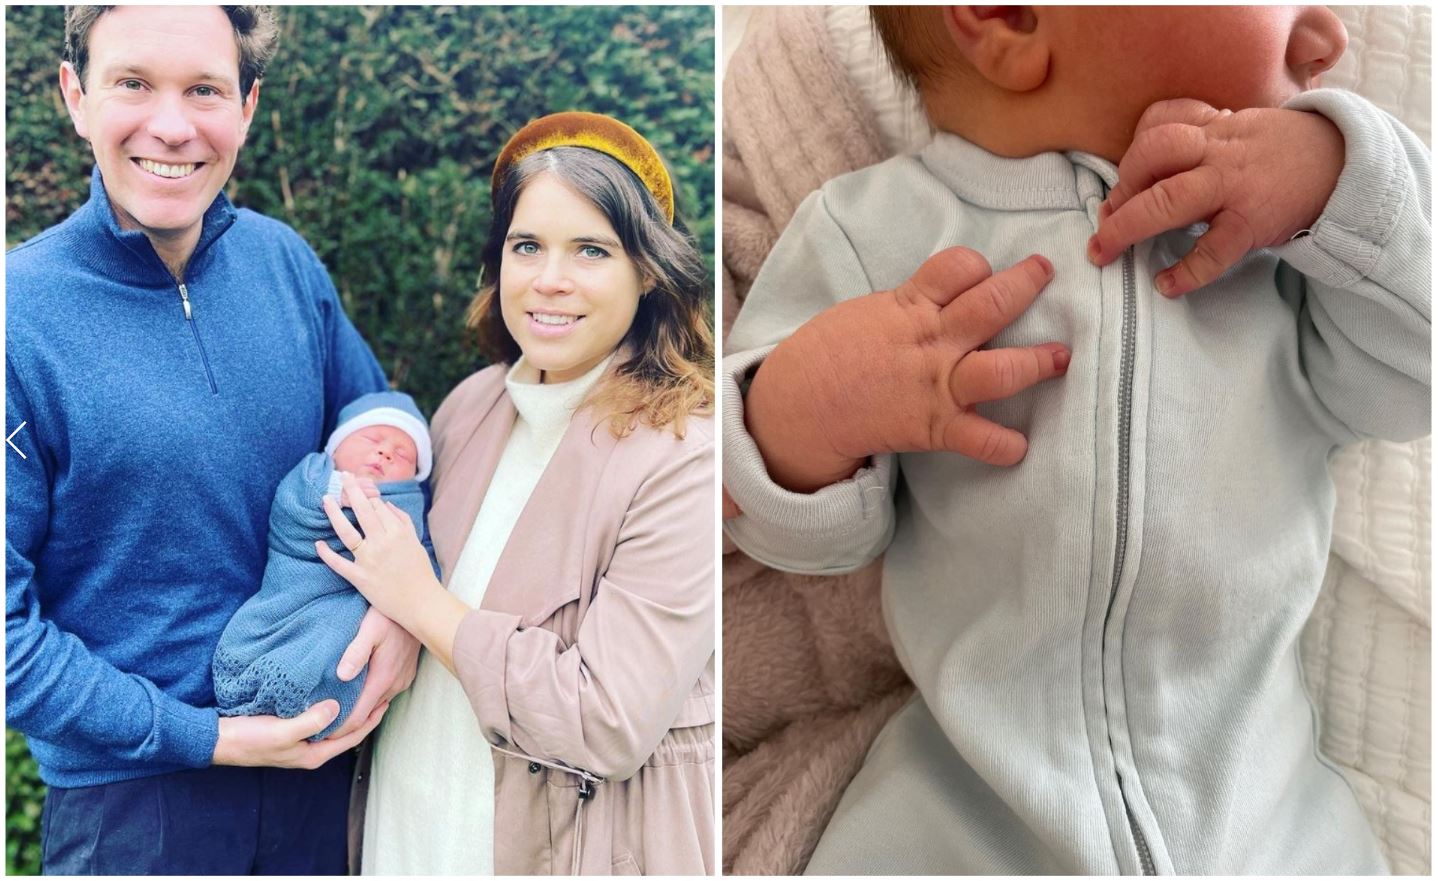 Princess Eugenie has subconsciously set 2021’s baby name trend, with another celeb already following suit